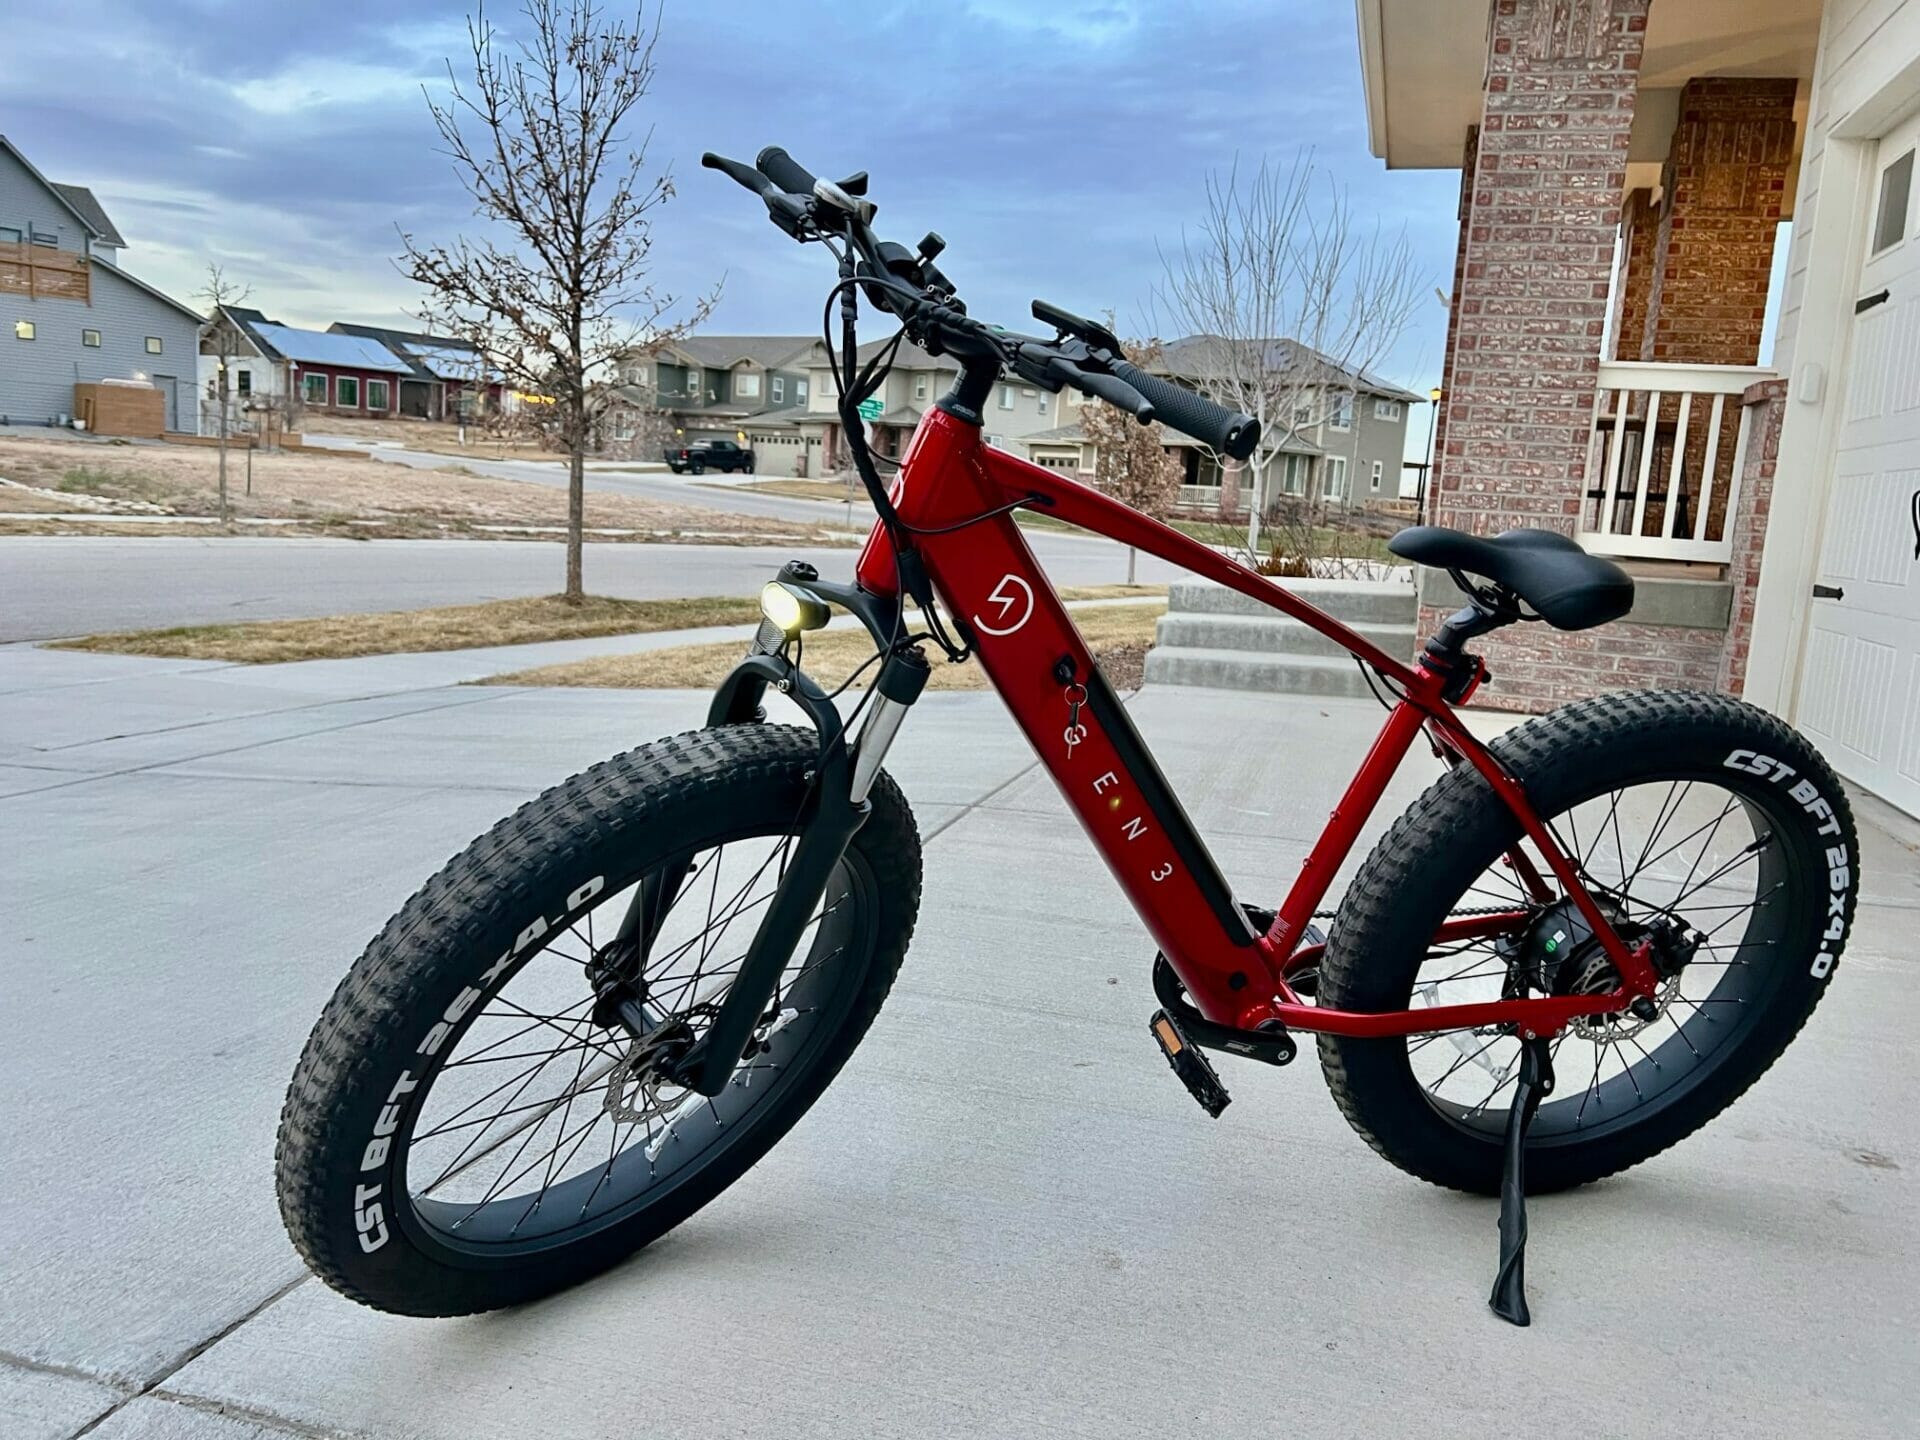 Gen 3 Outcross Review - Beautiful eBike, but how does it perform? 14